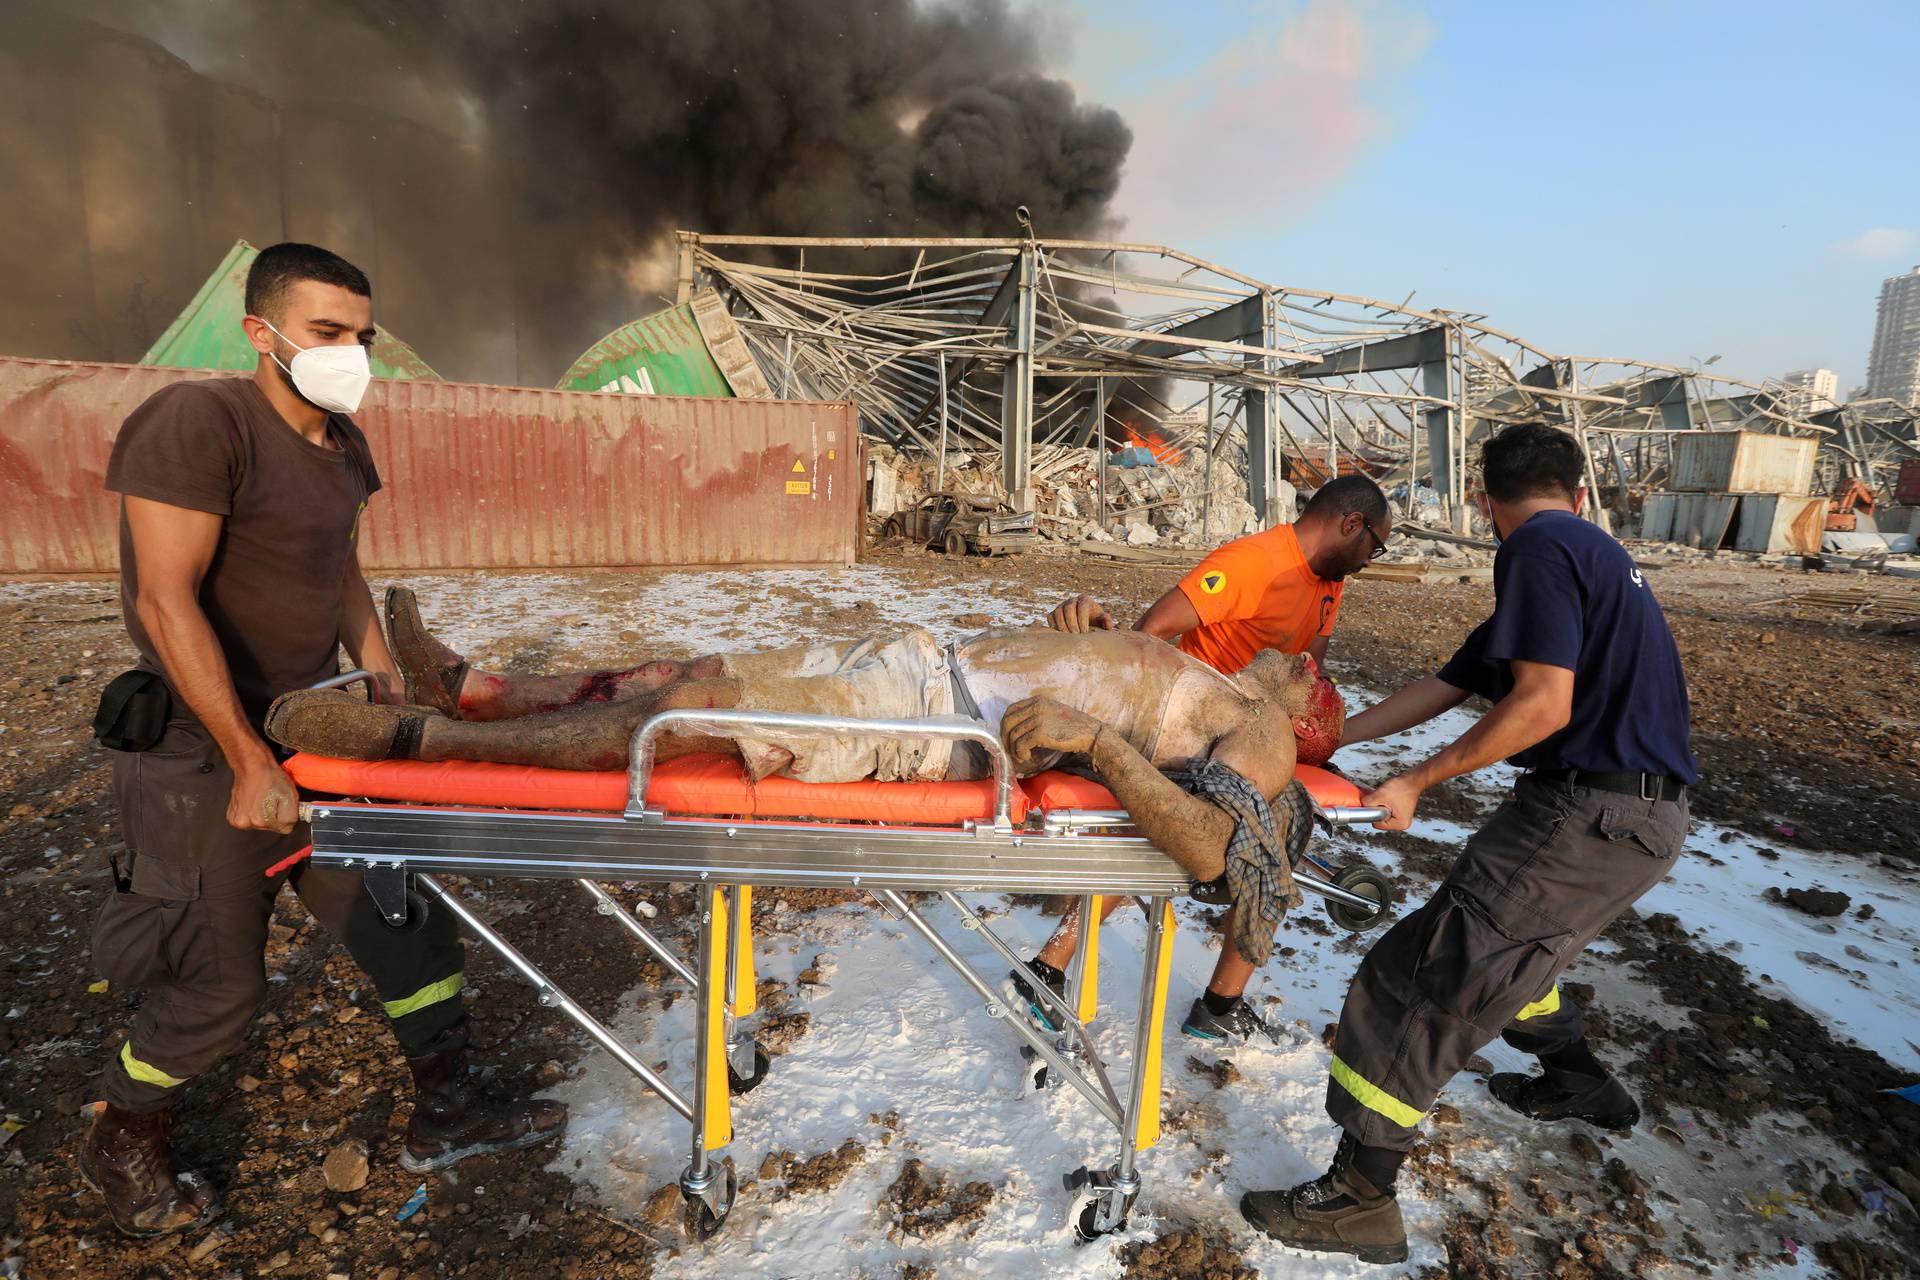 An injured man is transported on a stretcher following an explosion in Beirut's port area